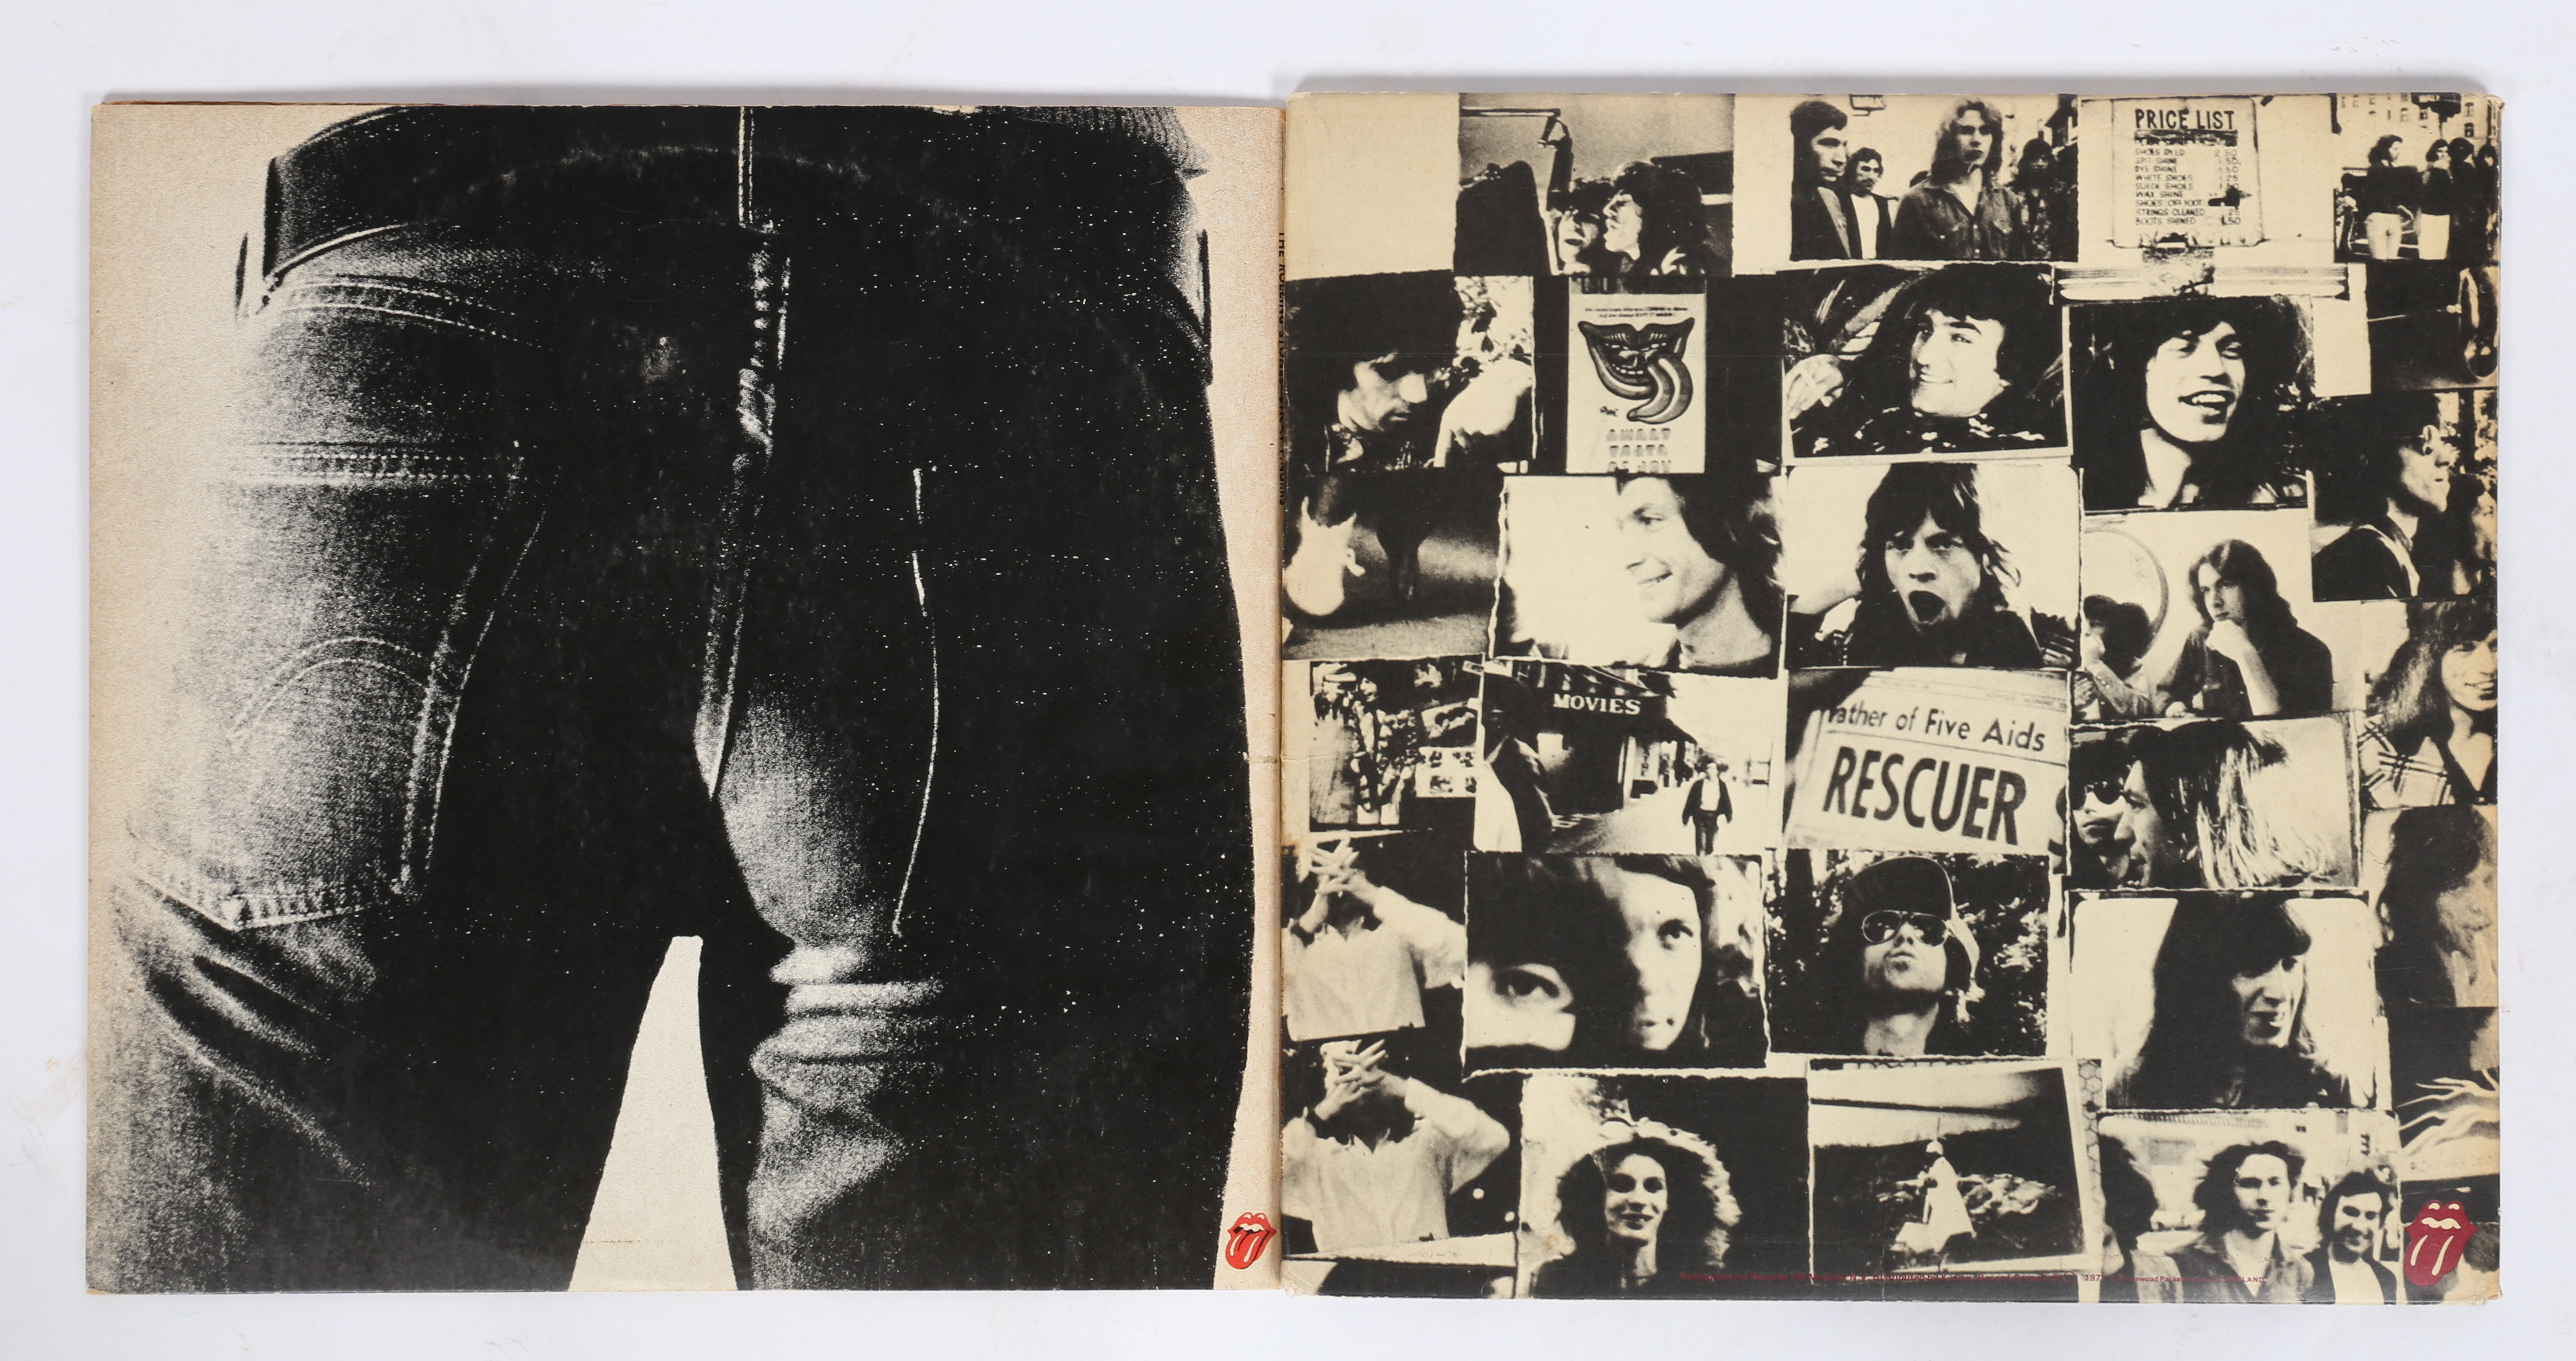 THE ROLLING STONES - LP COLLECTION. - Image 4 of 4